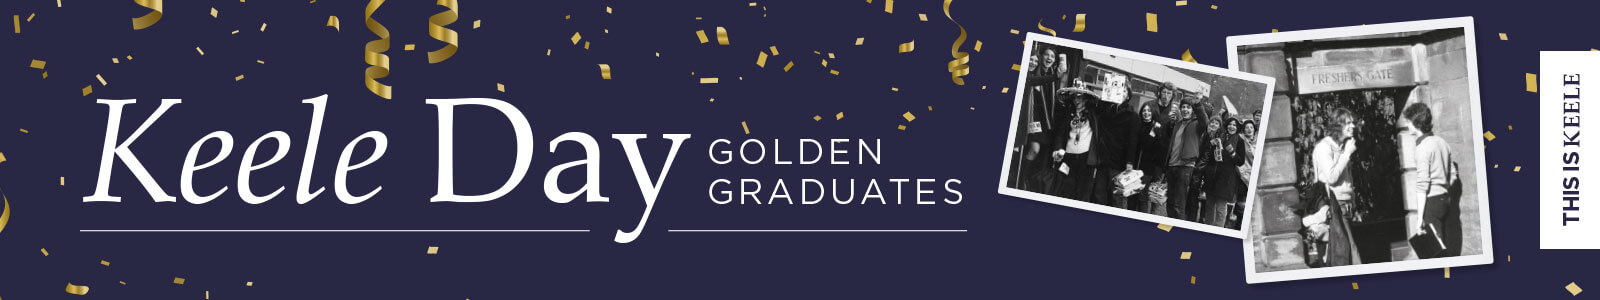 Banner for Golden Graduates event with save the date details on for 2 July 2022